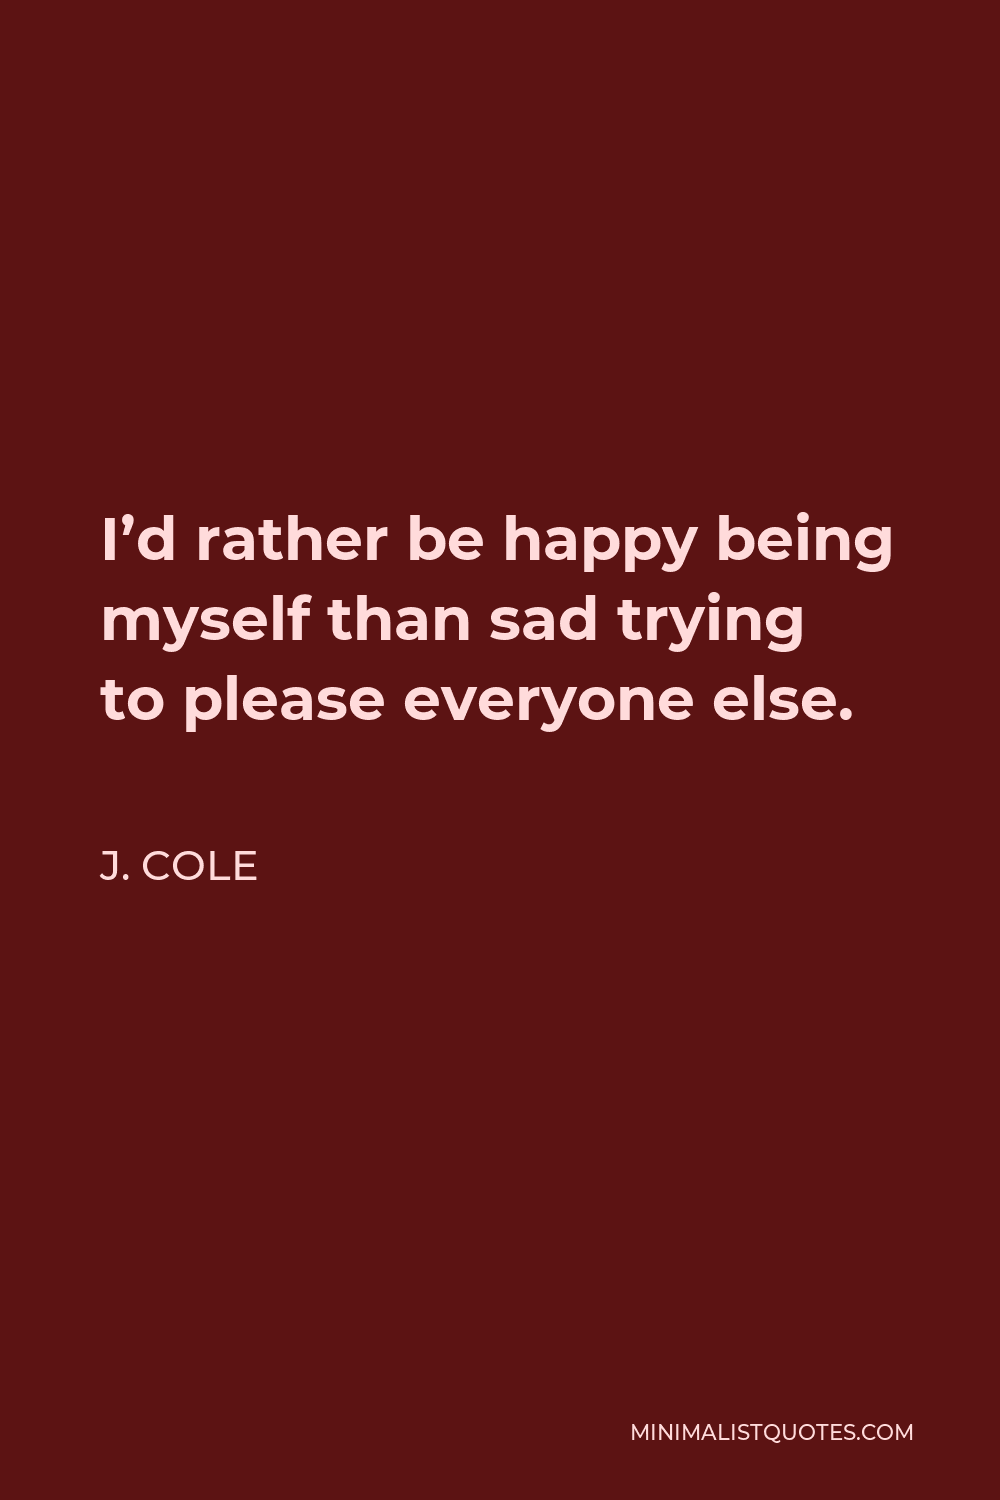 J. Cole Quote - I’d rather be happy being myself than sad trying to please everyone else.